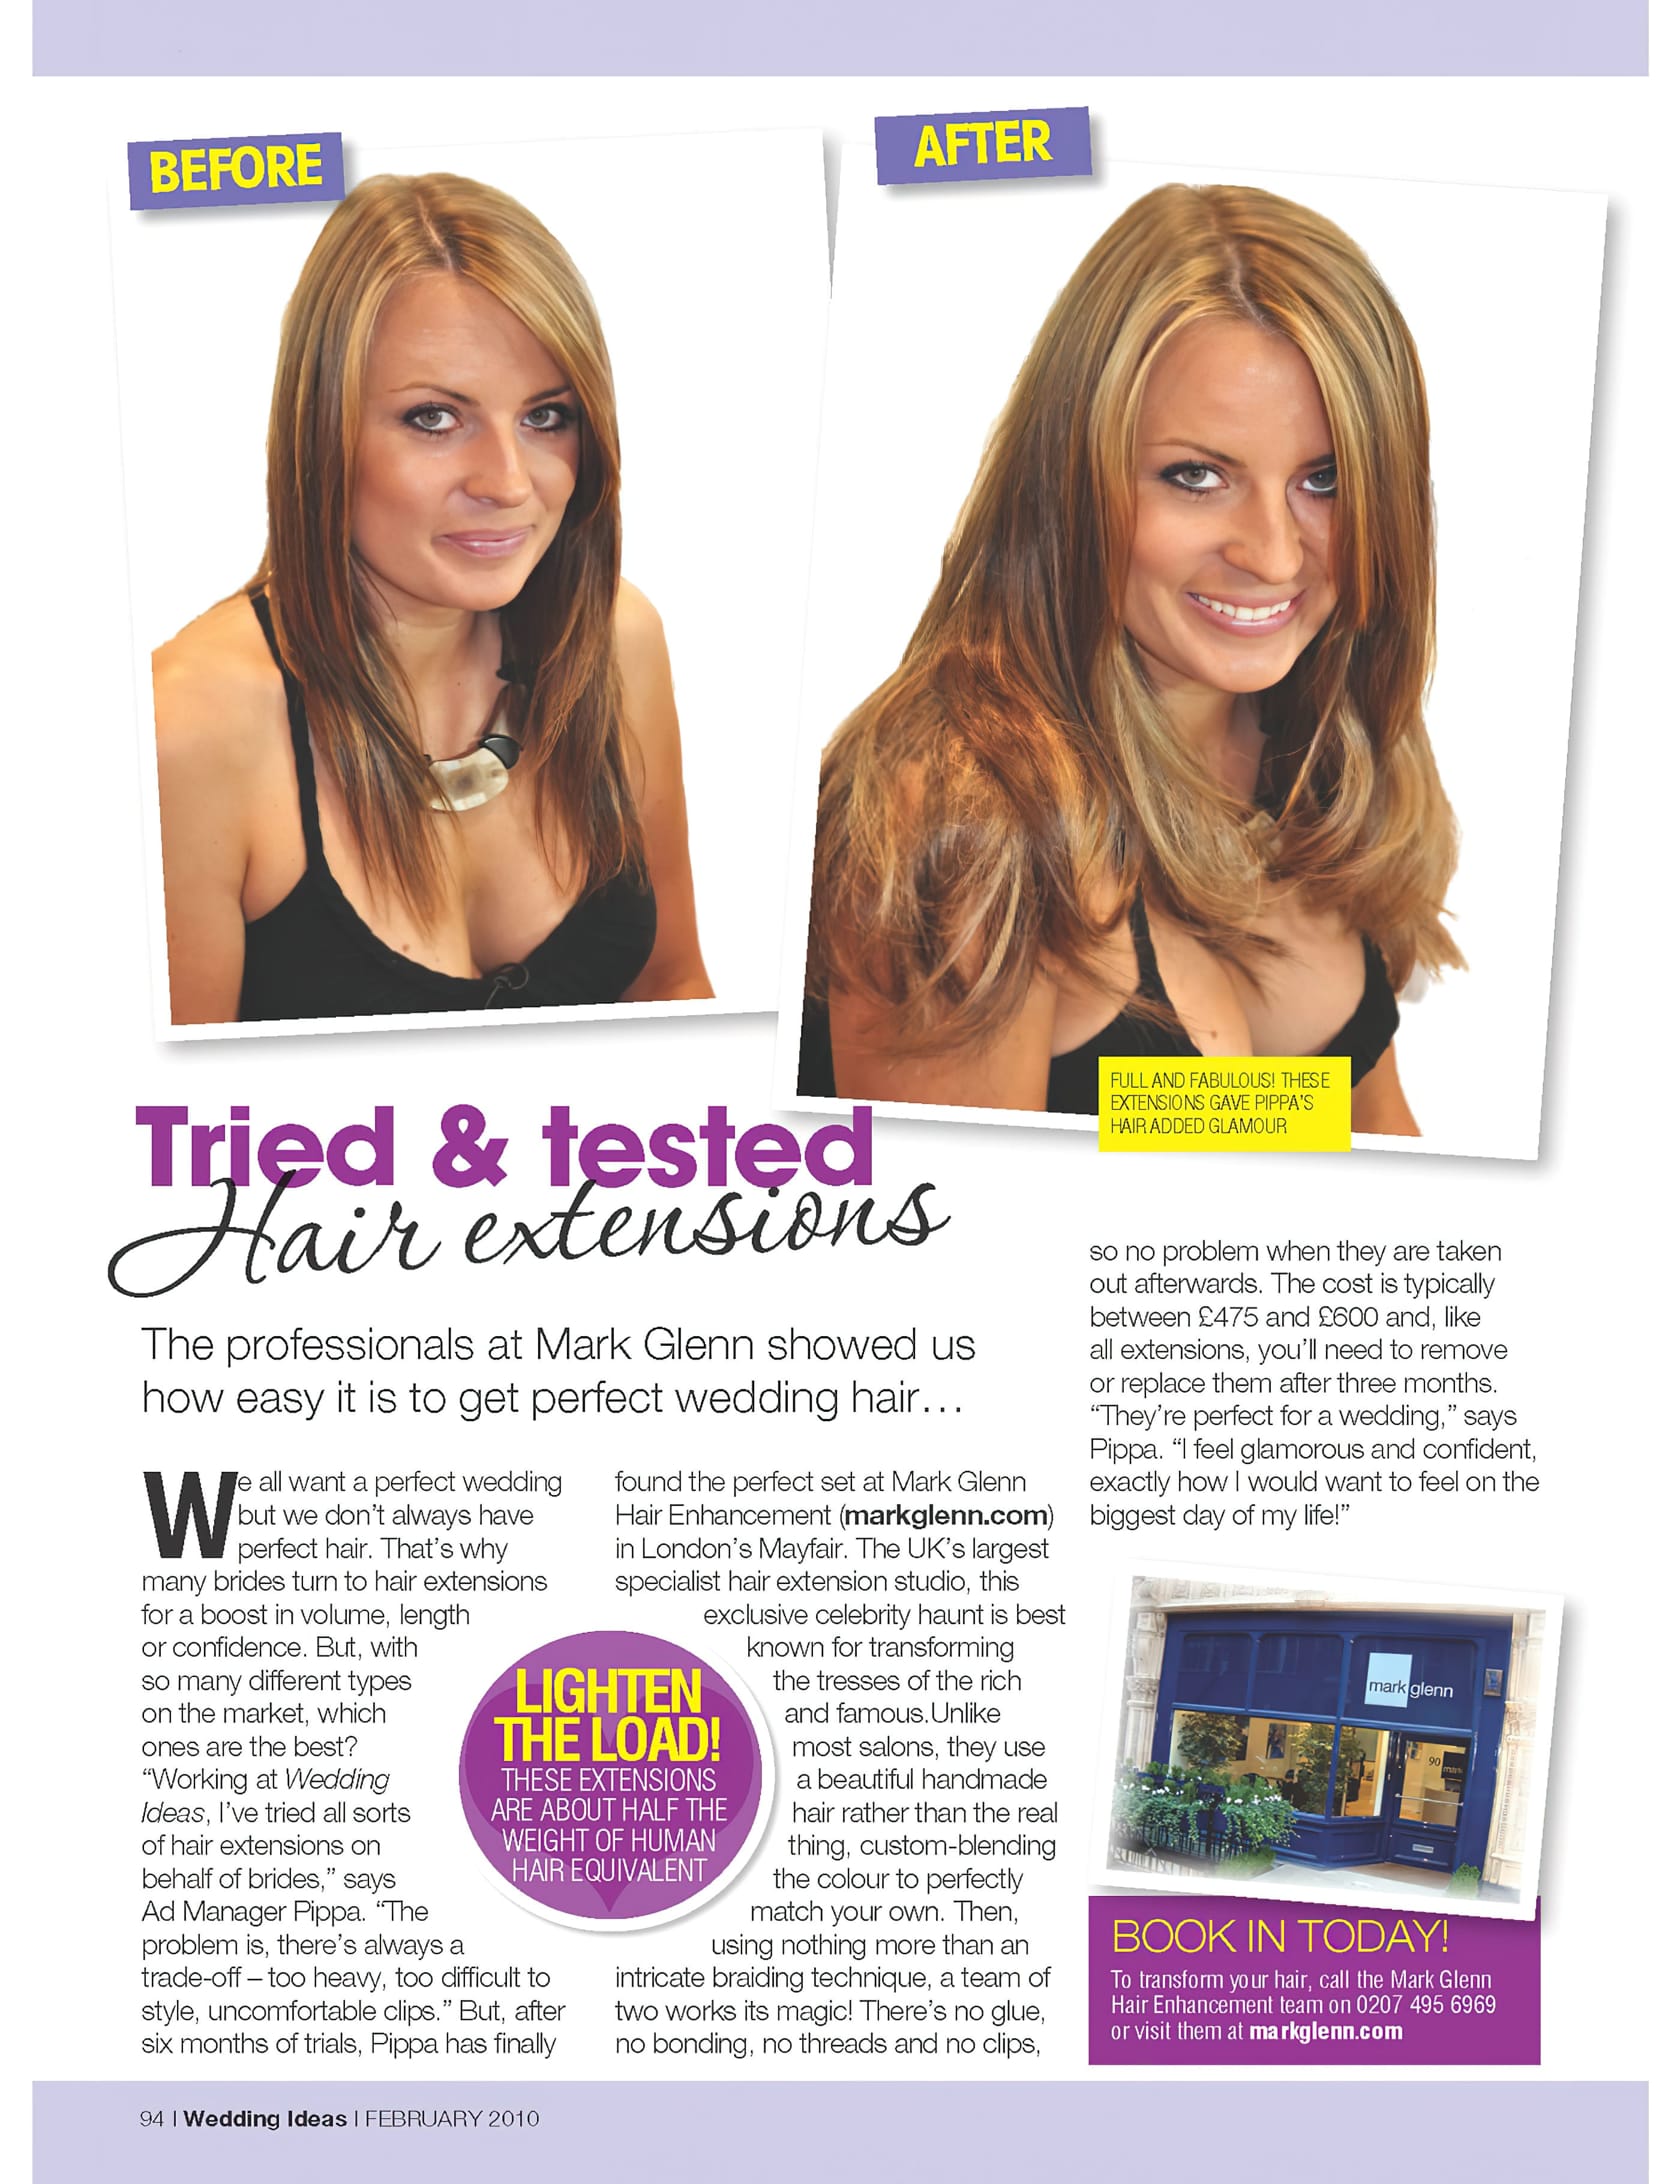 Mark Glenn hair extensions voted the best after 6 months of magazine trials